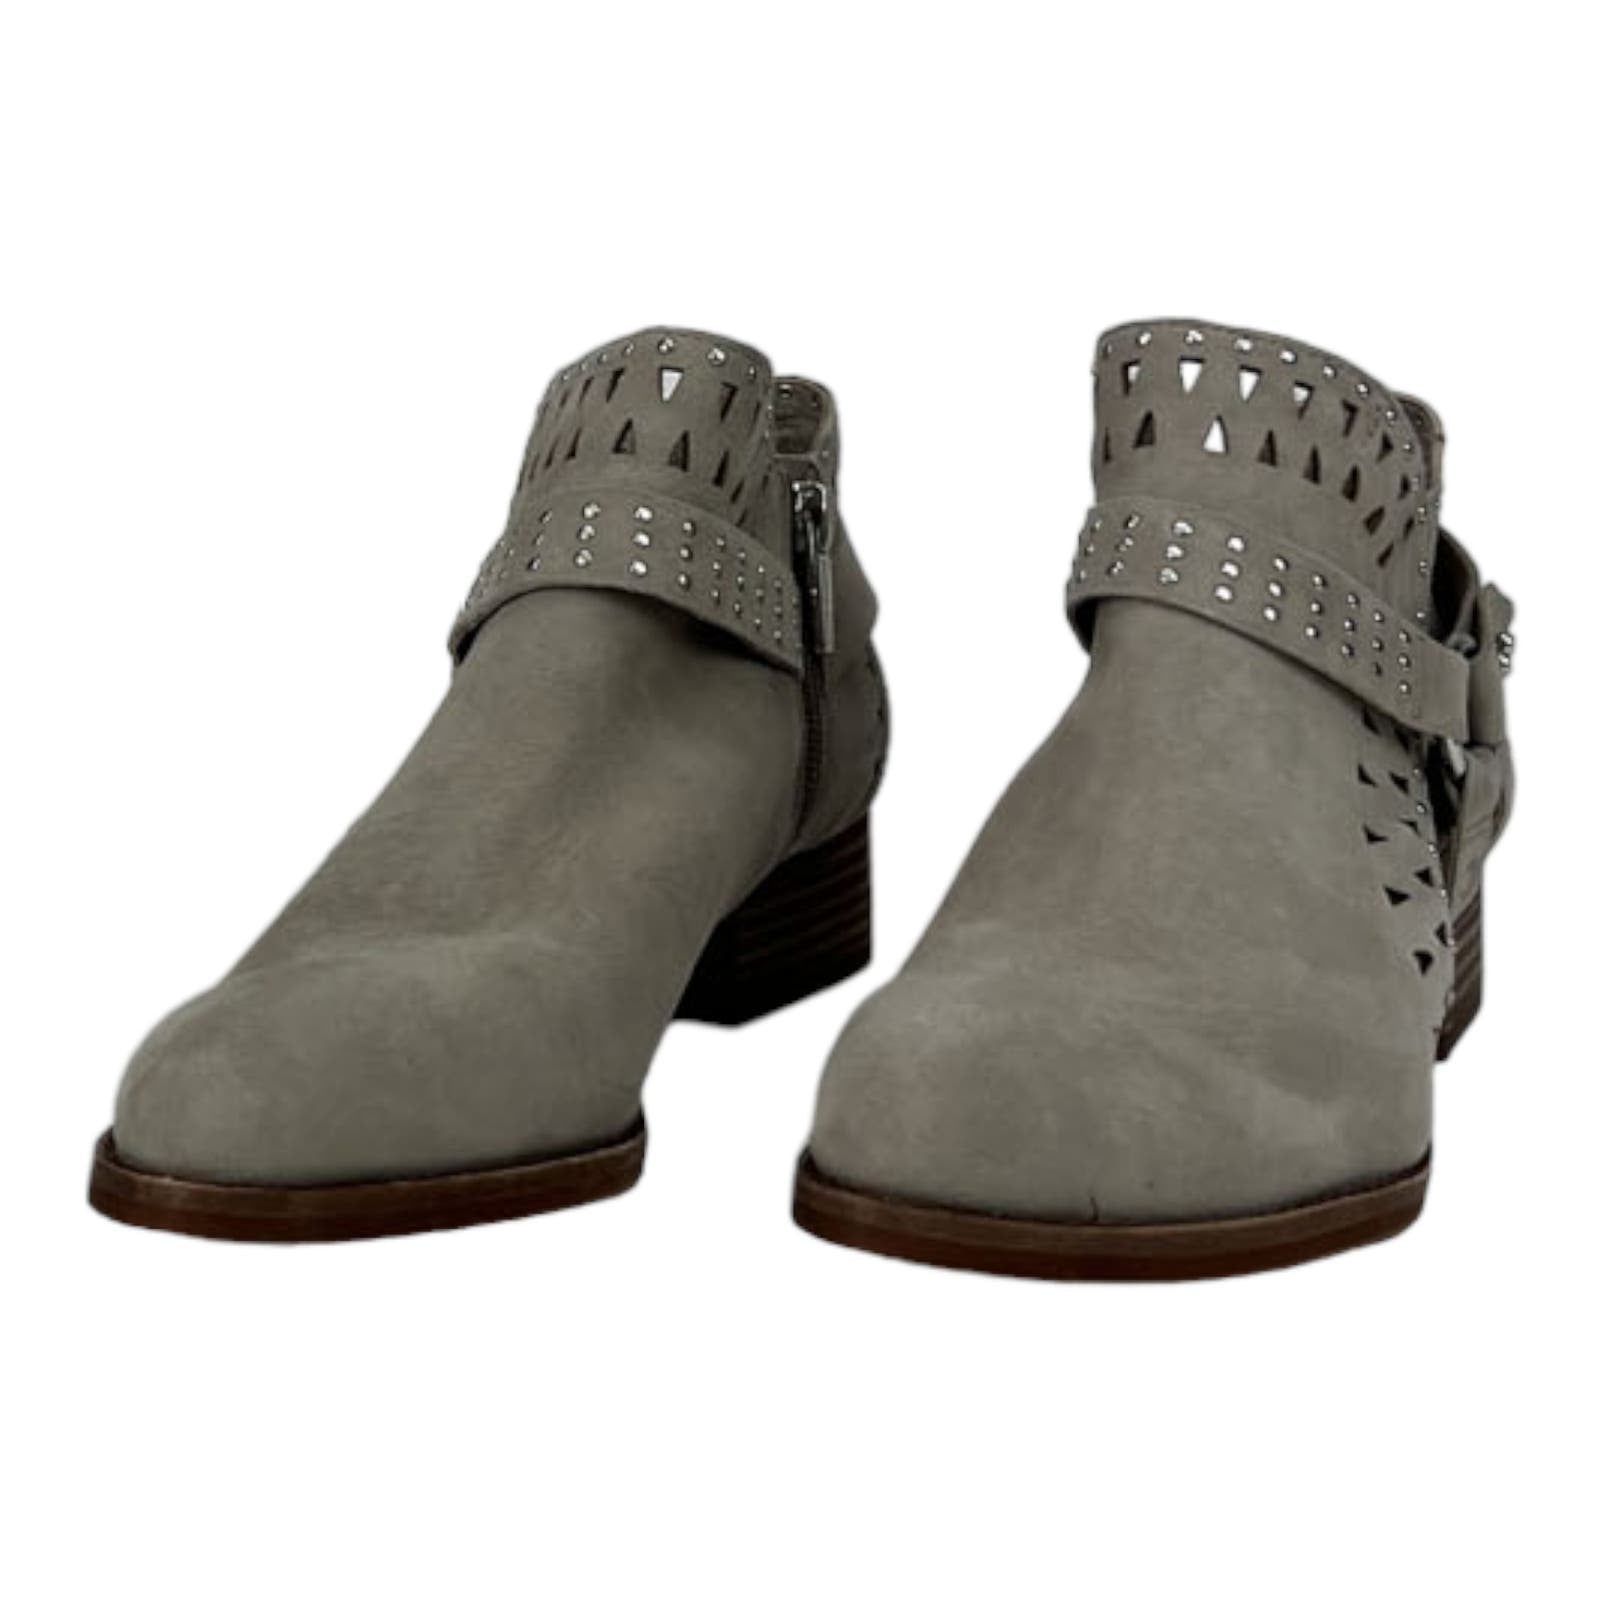 Vince Camuto Women US 6 London Fog True Suede Grey Ankle Boots